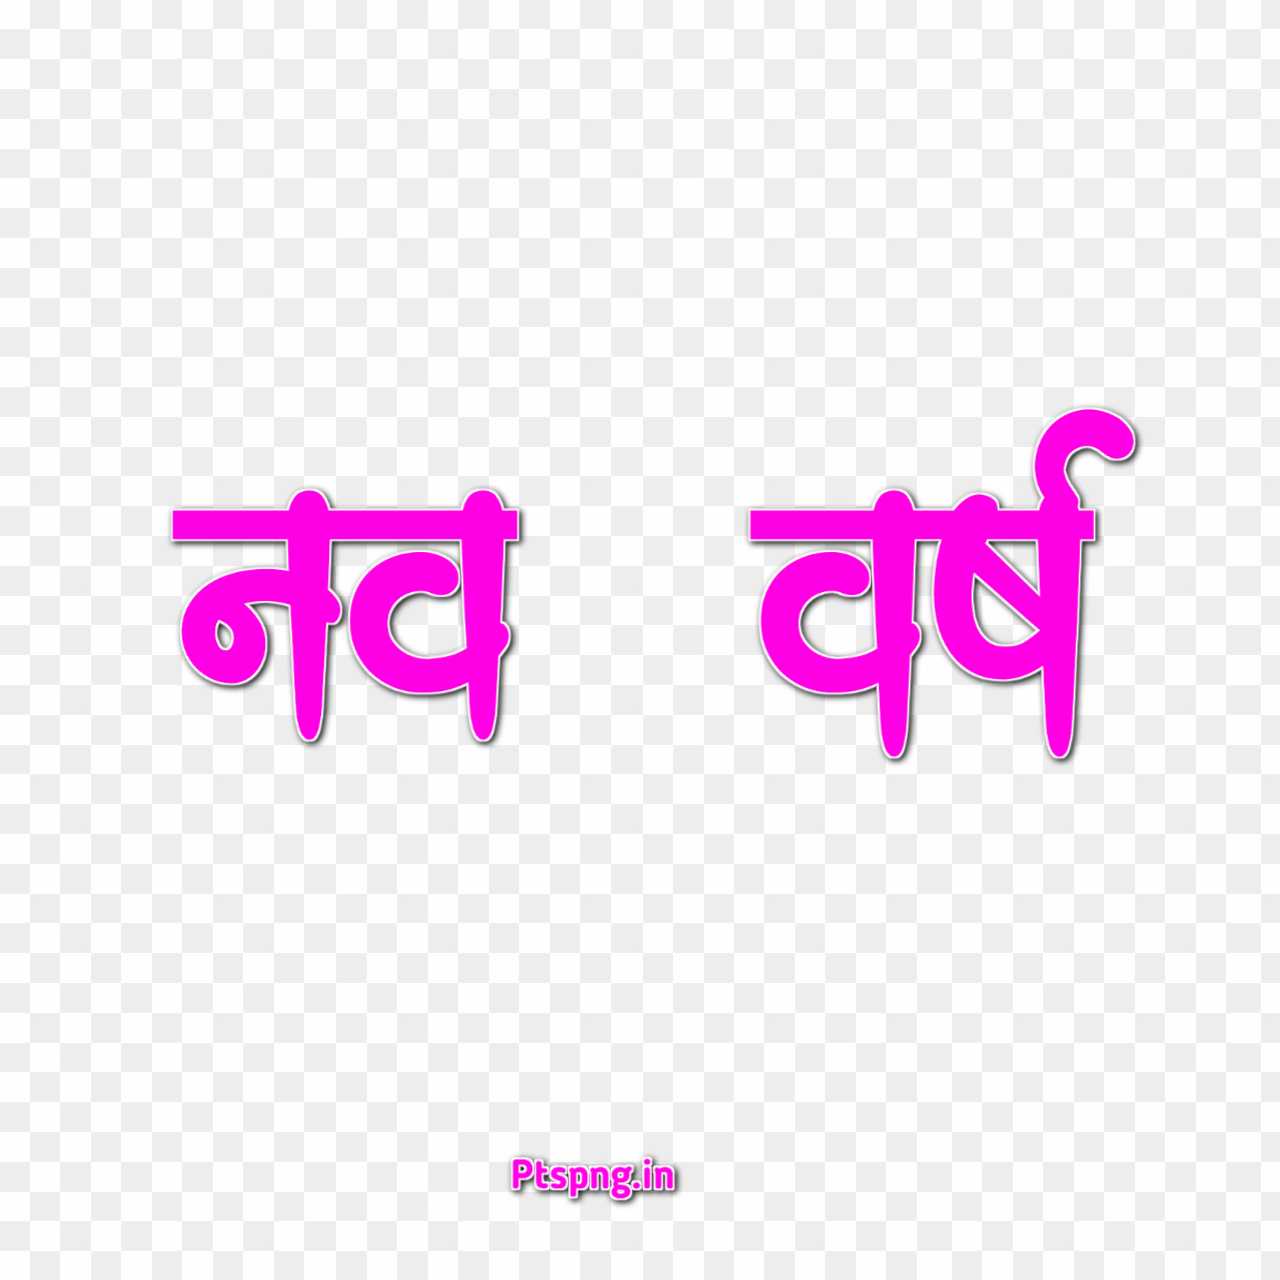 New year in Hindi text PNG transparent images